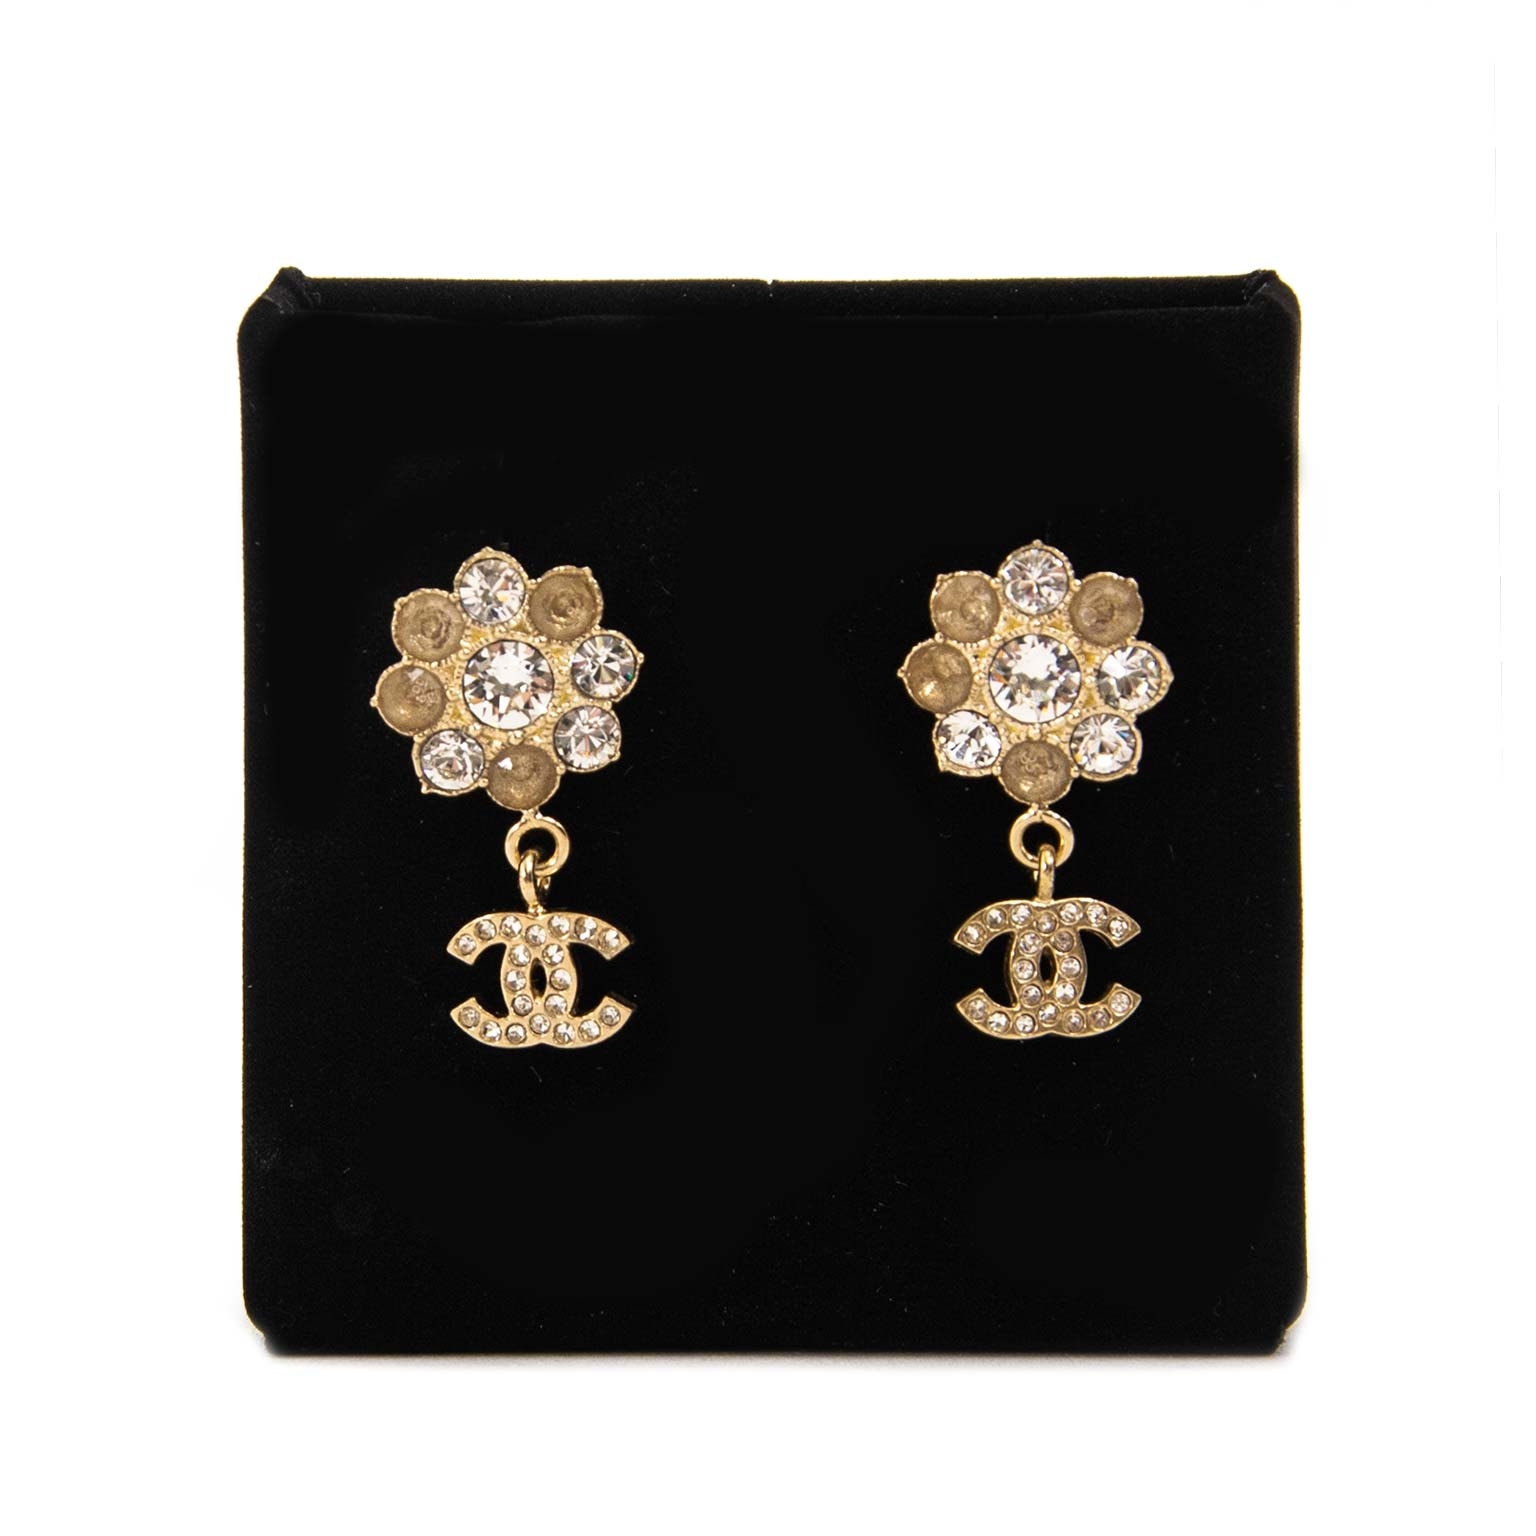 Chanel 'Double C' Rose Gold and Diamond Earrings